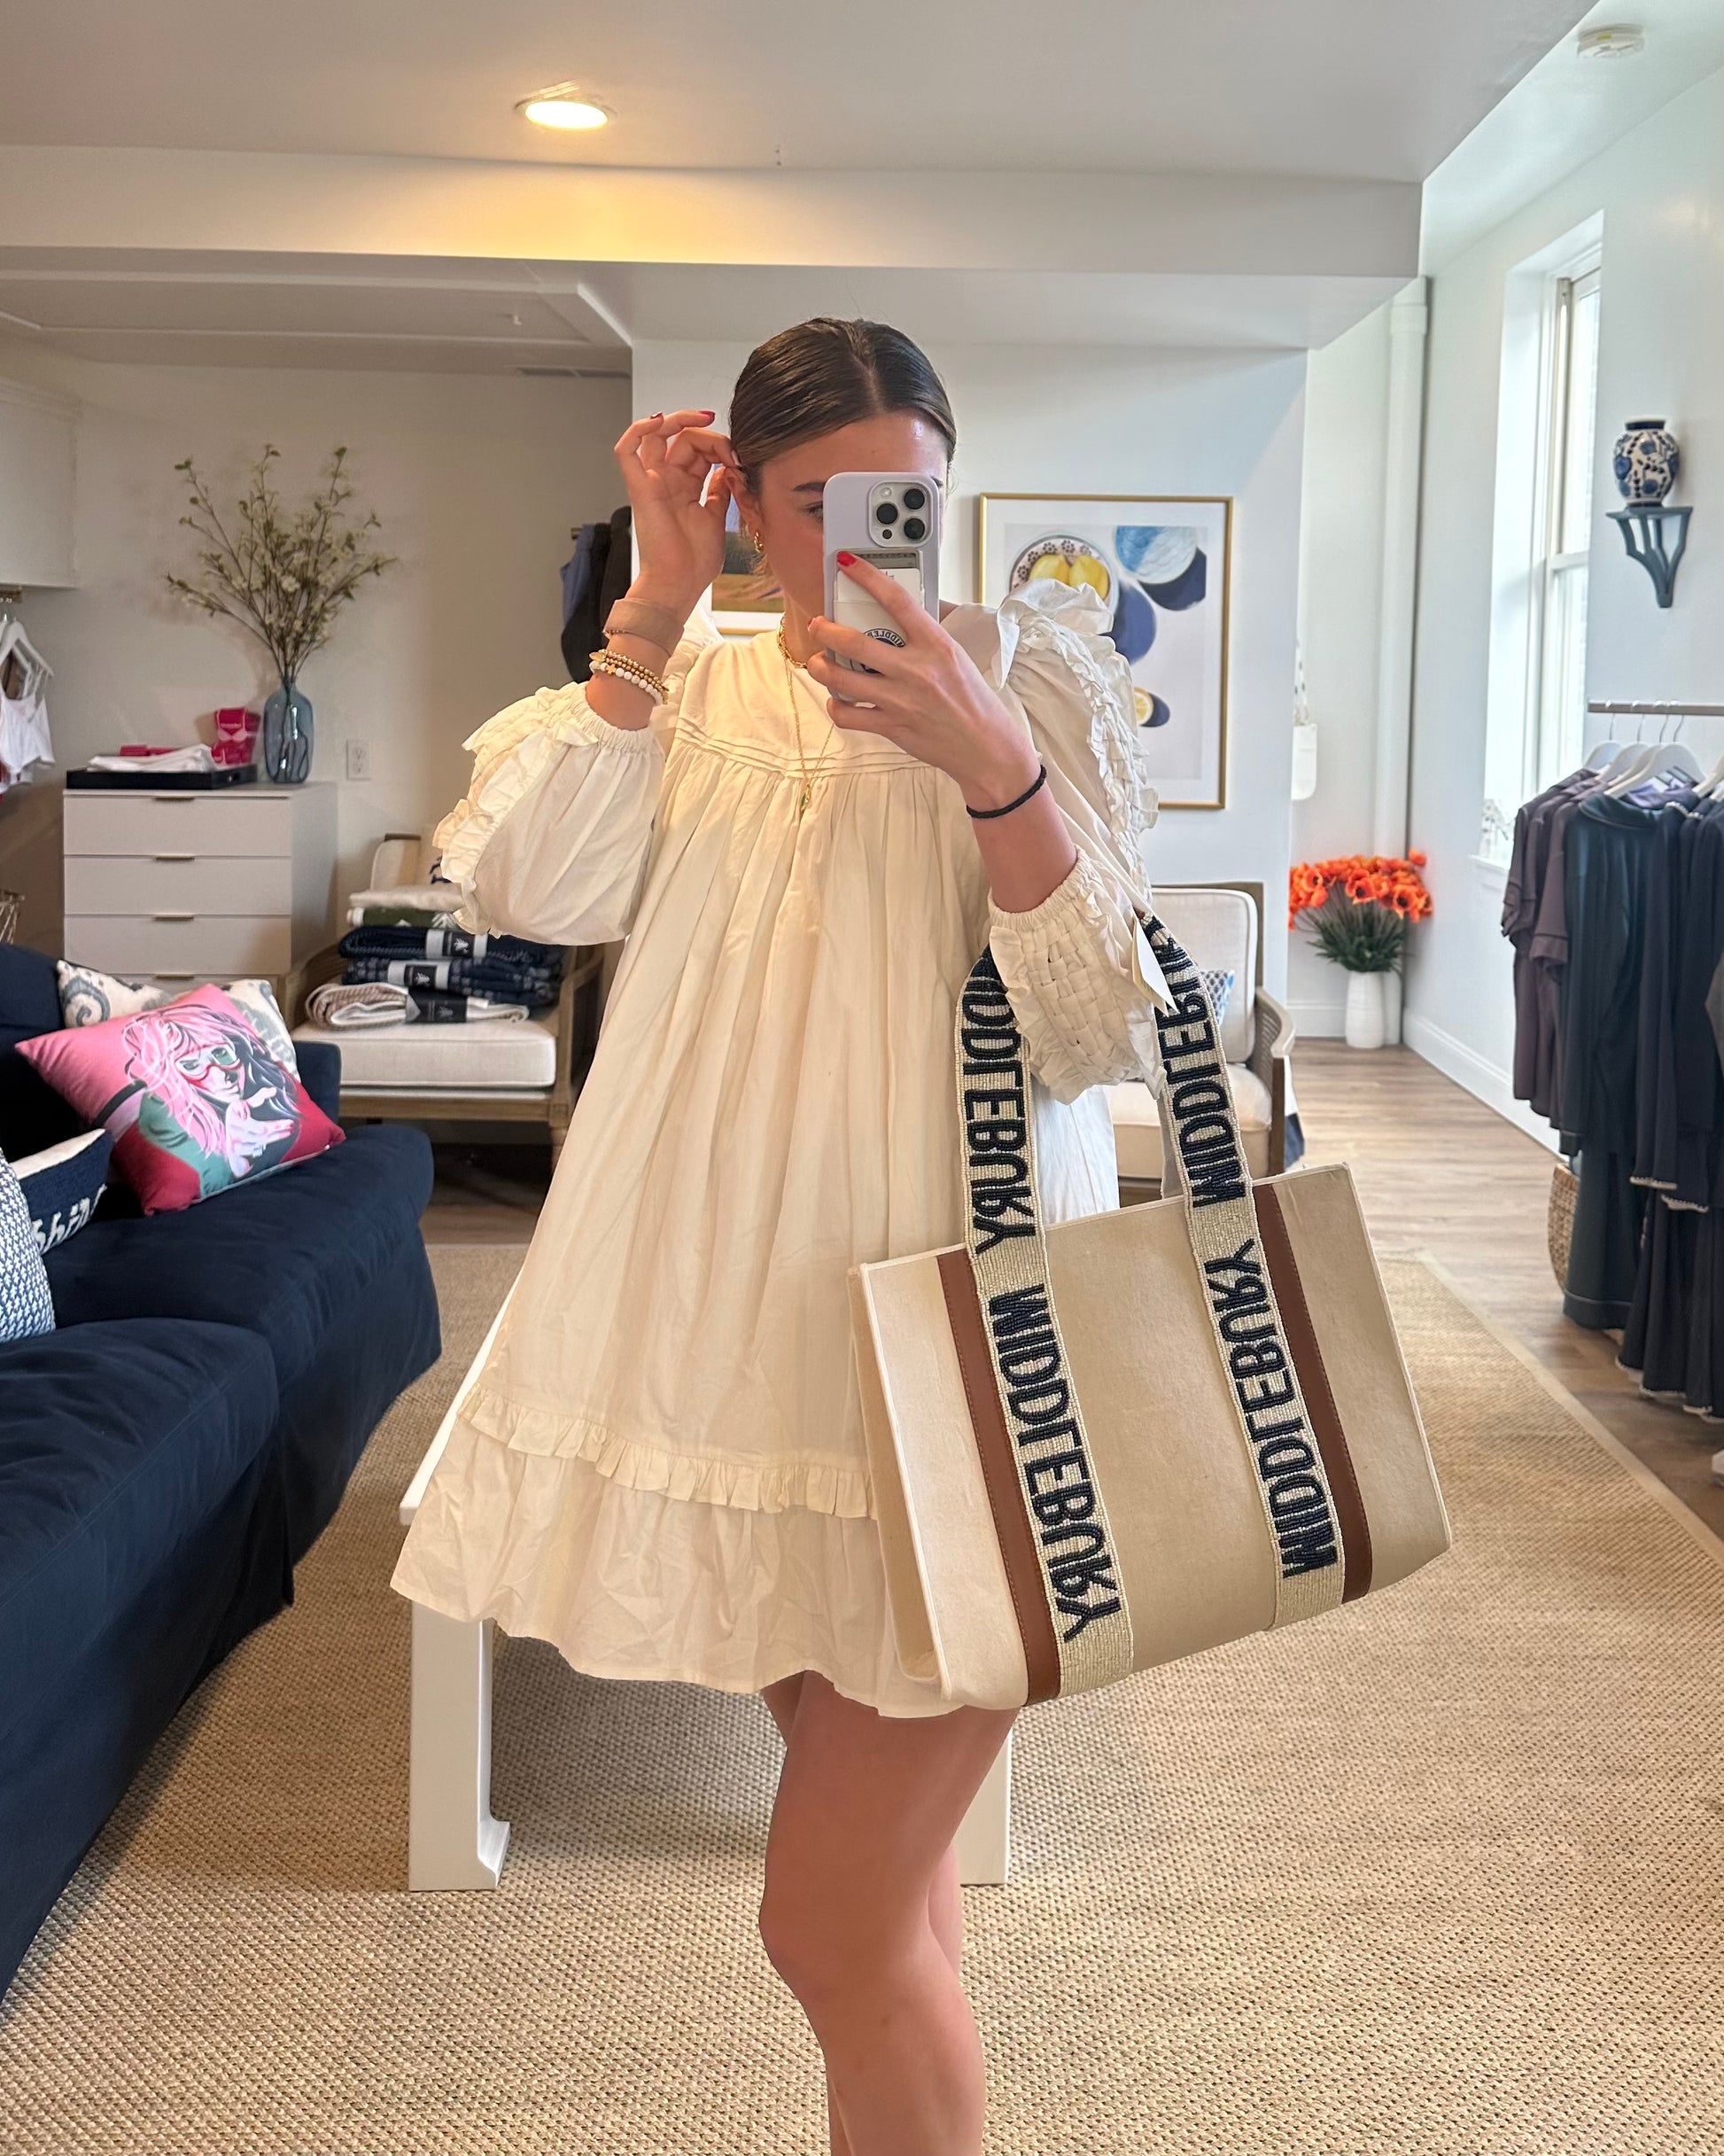 Model wearing White dress taking a selfie with Middlebury College Beaded Canvas MIDDLEBURY Tote in store